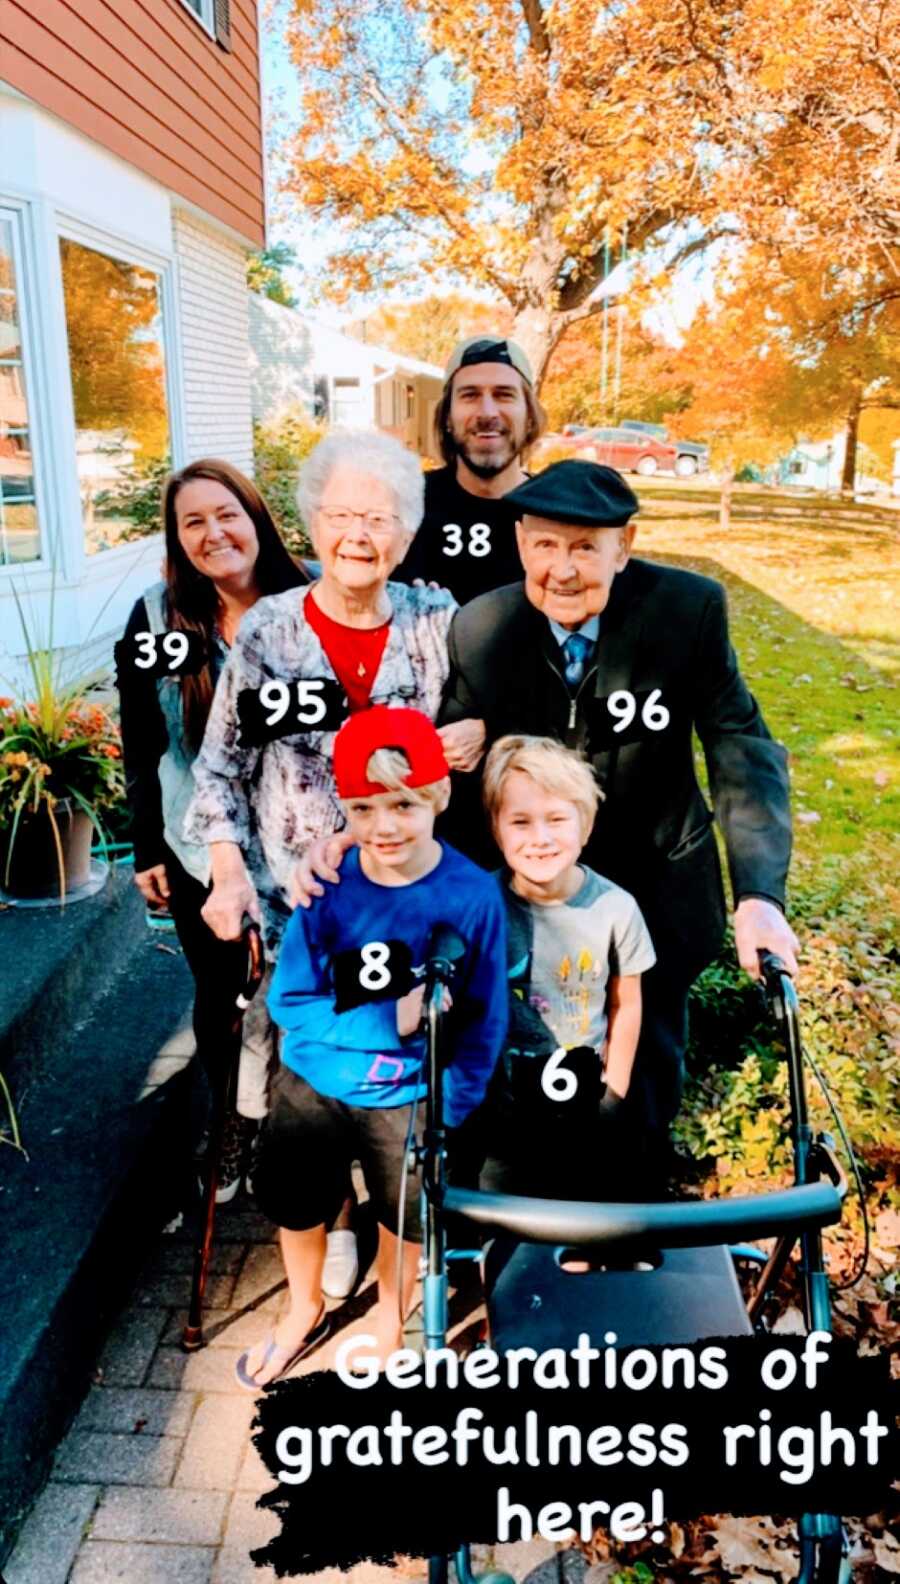 Woman takes a photo with her grandparents, husband, and kids while visiting family